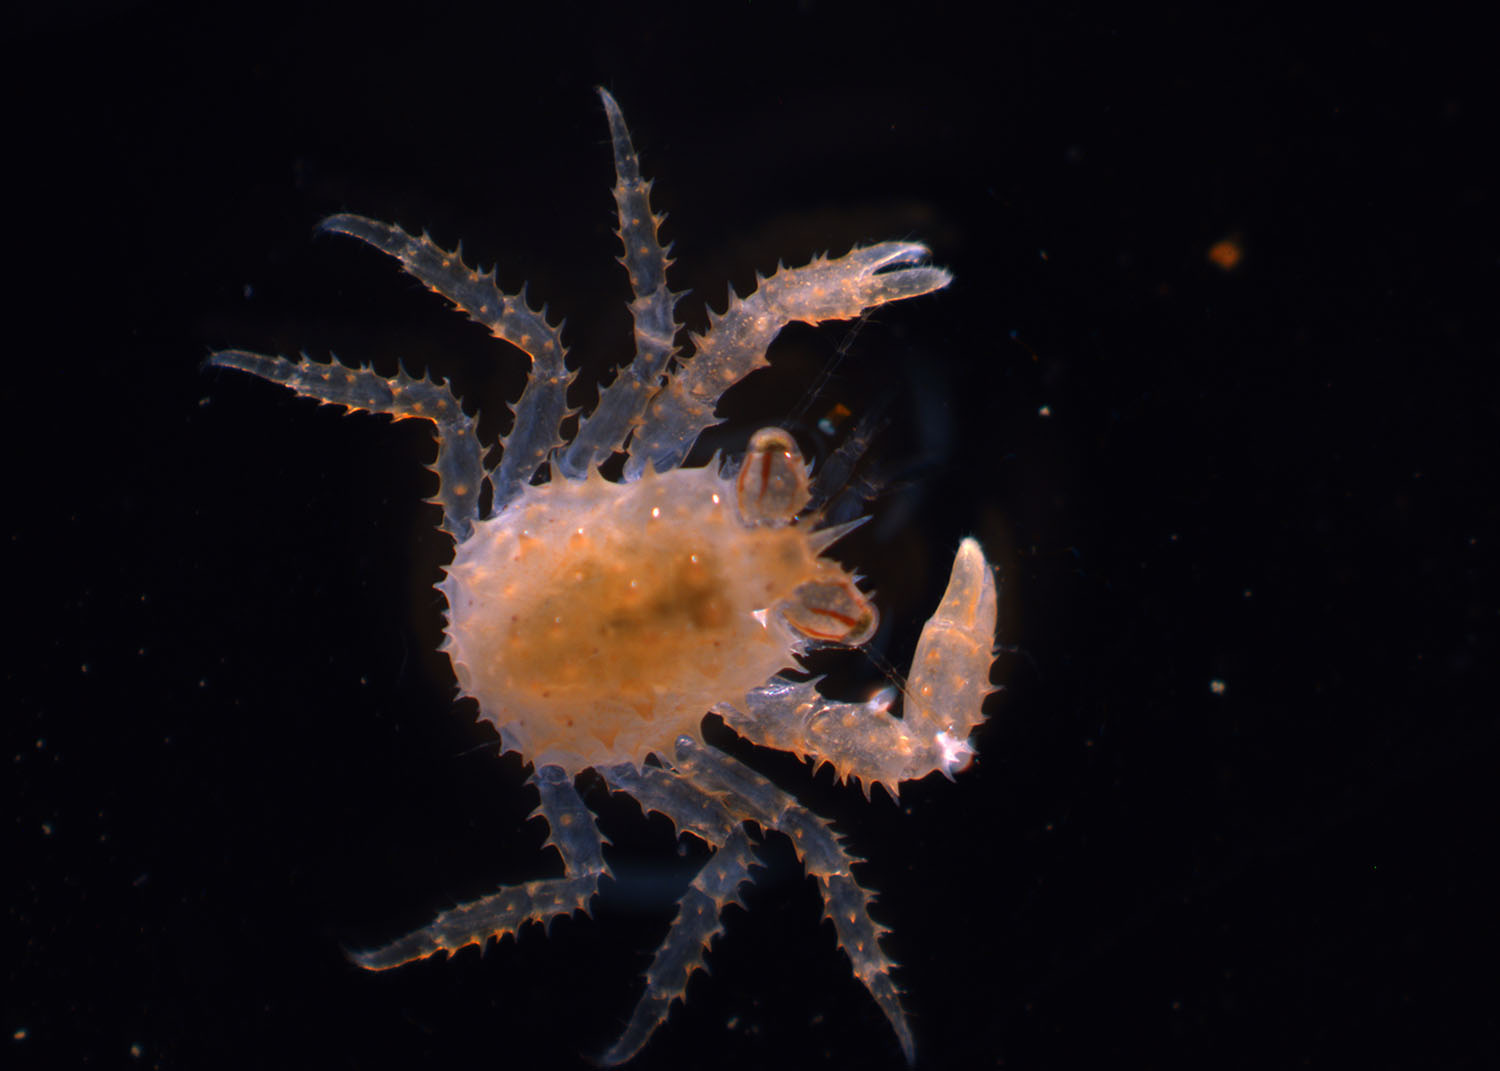 Microscope image of a juvenile red king crab